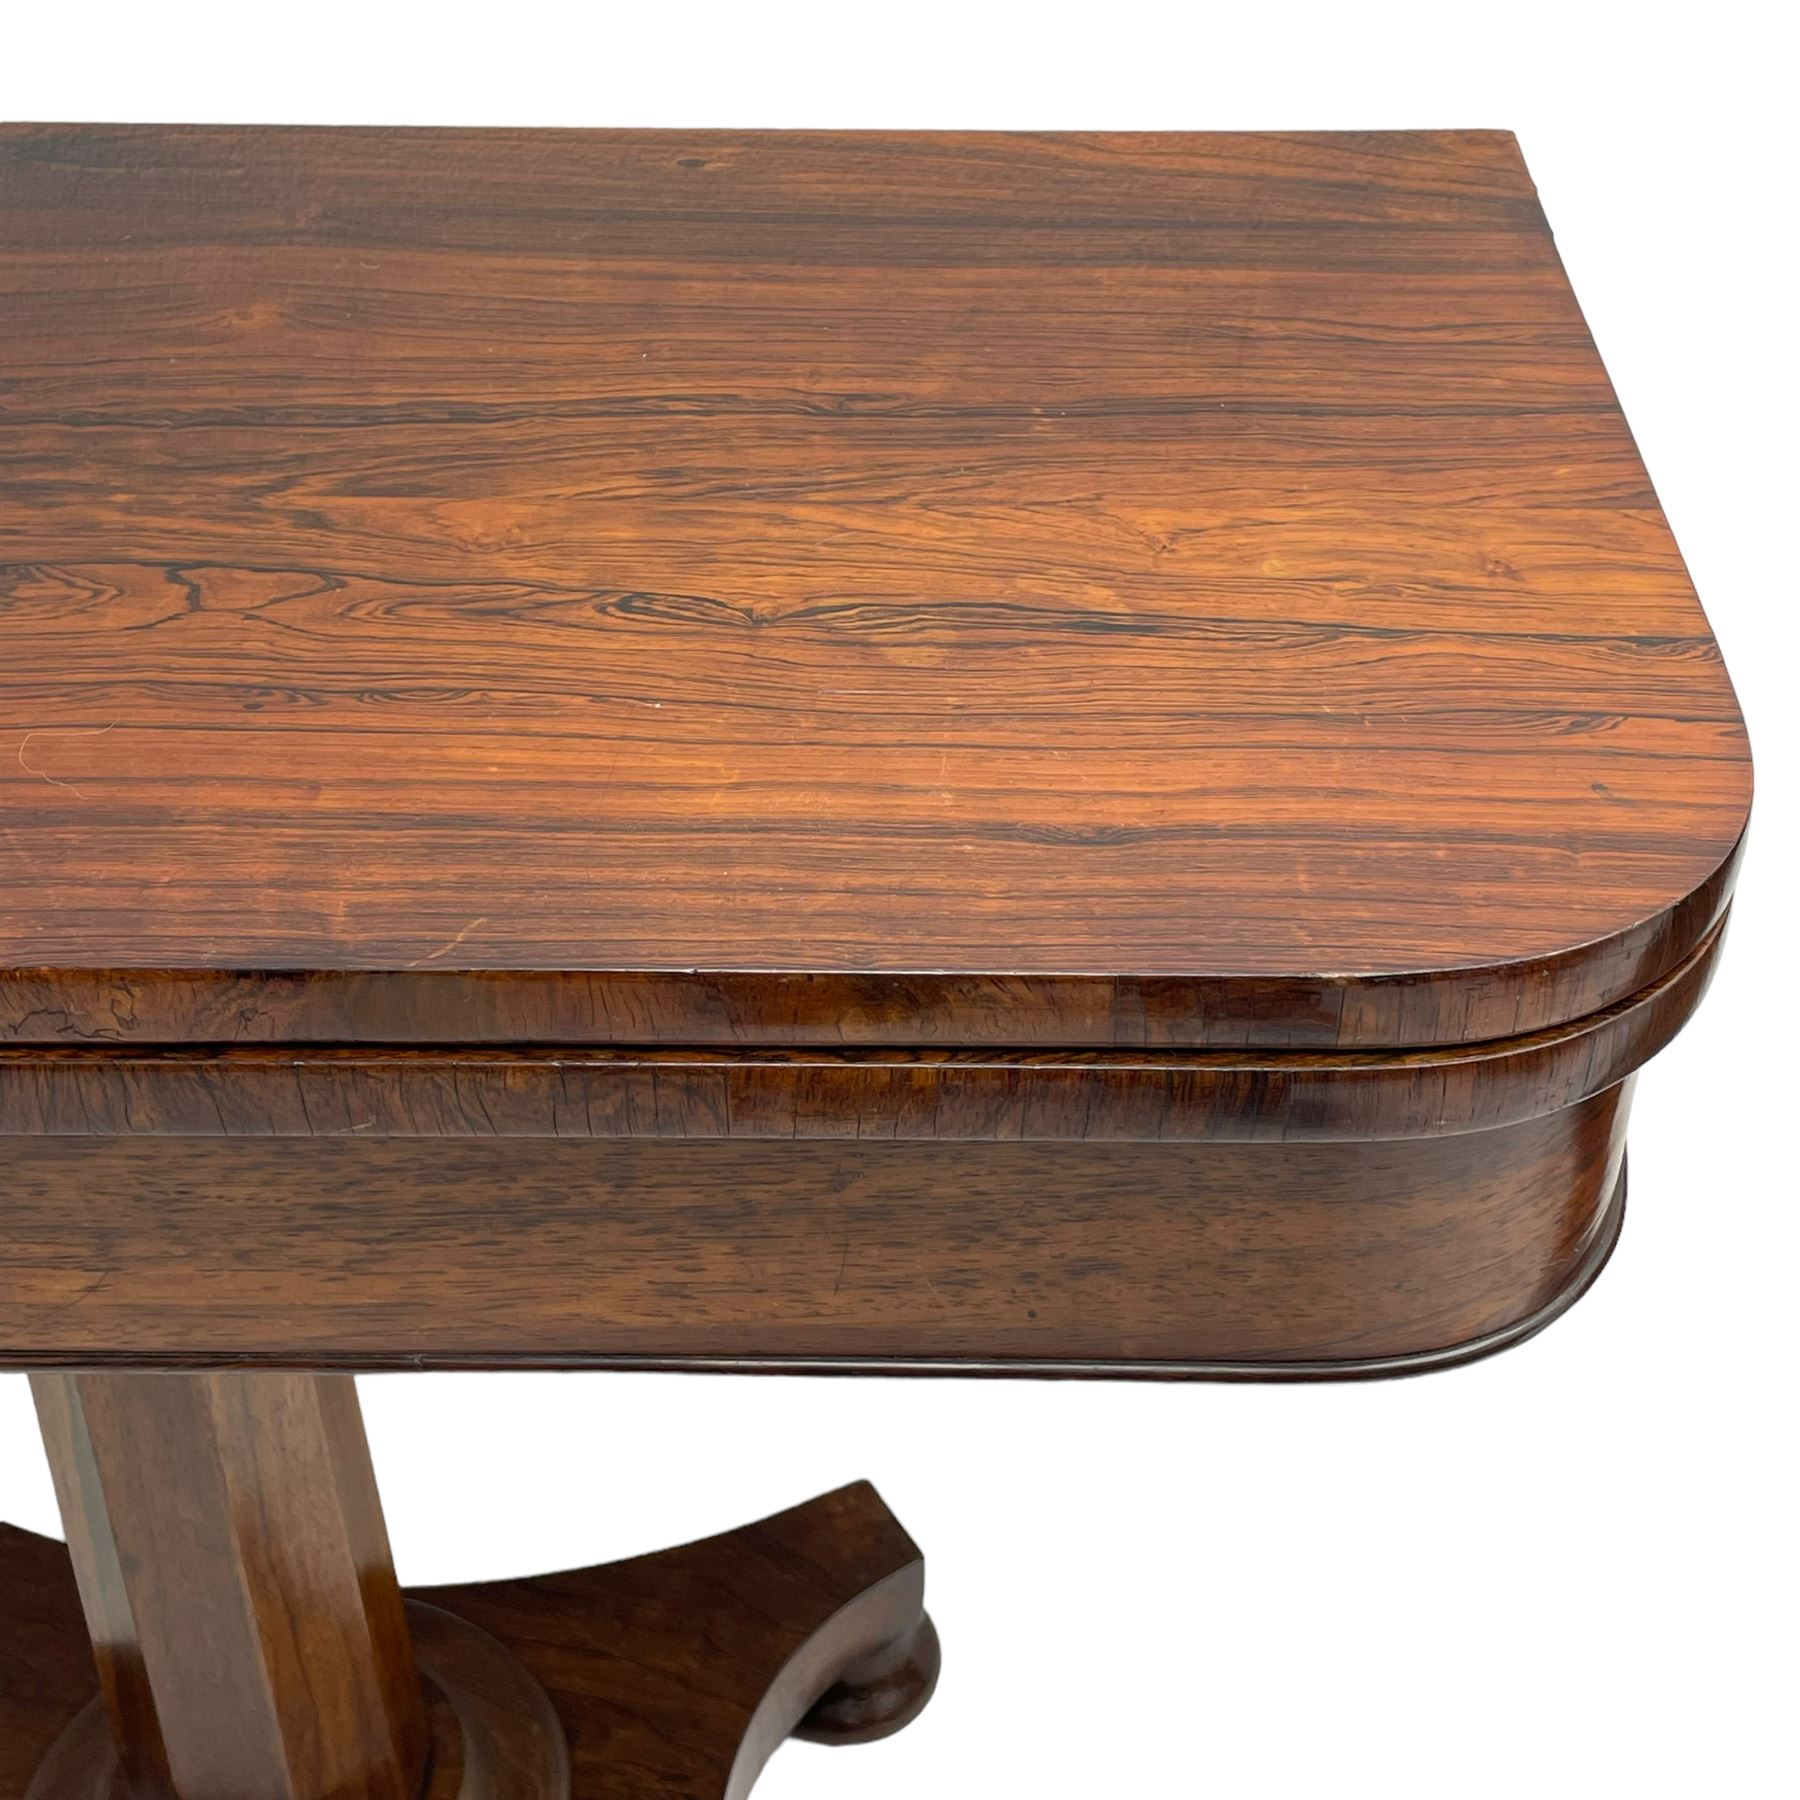 Early Victorian rosewood card table - Image 5 of 11